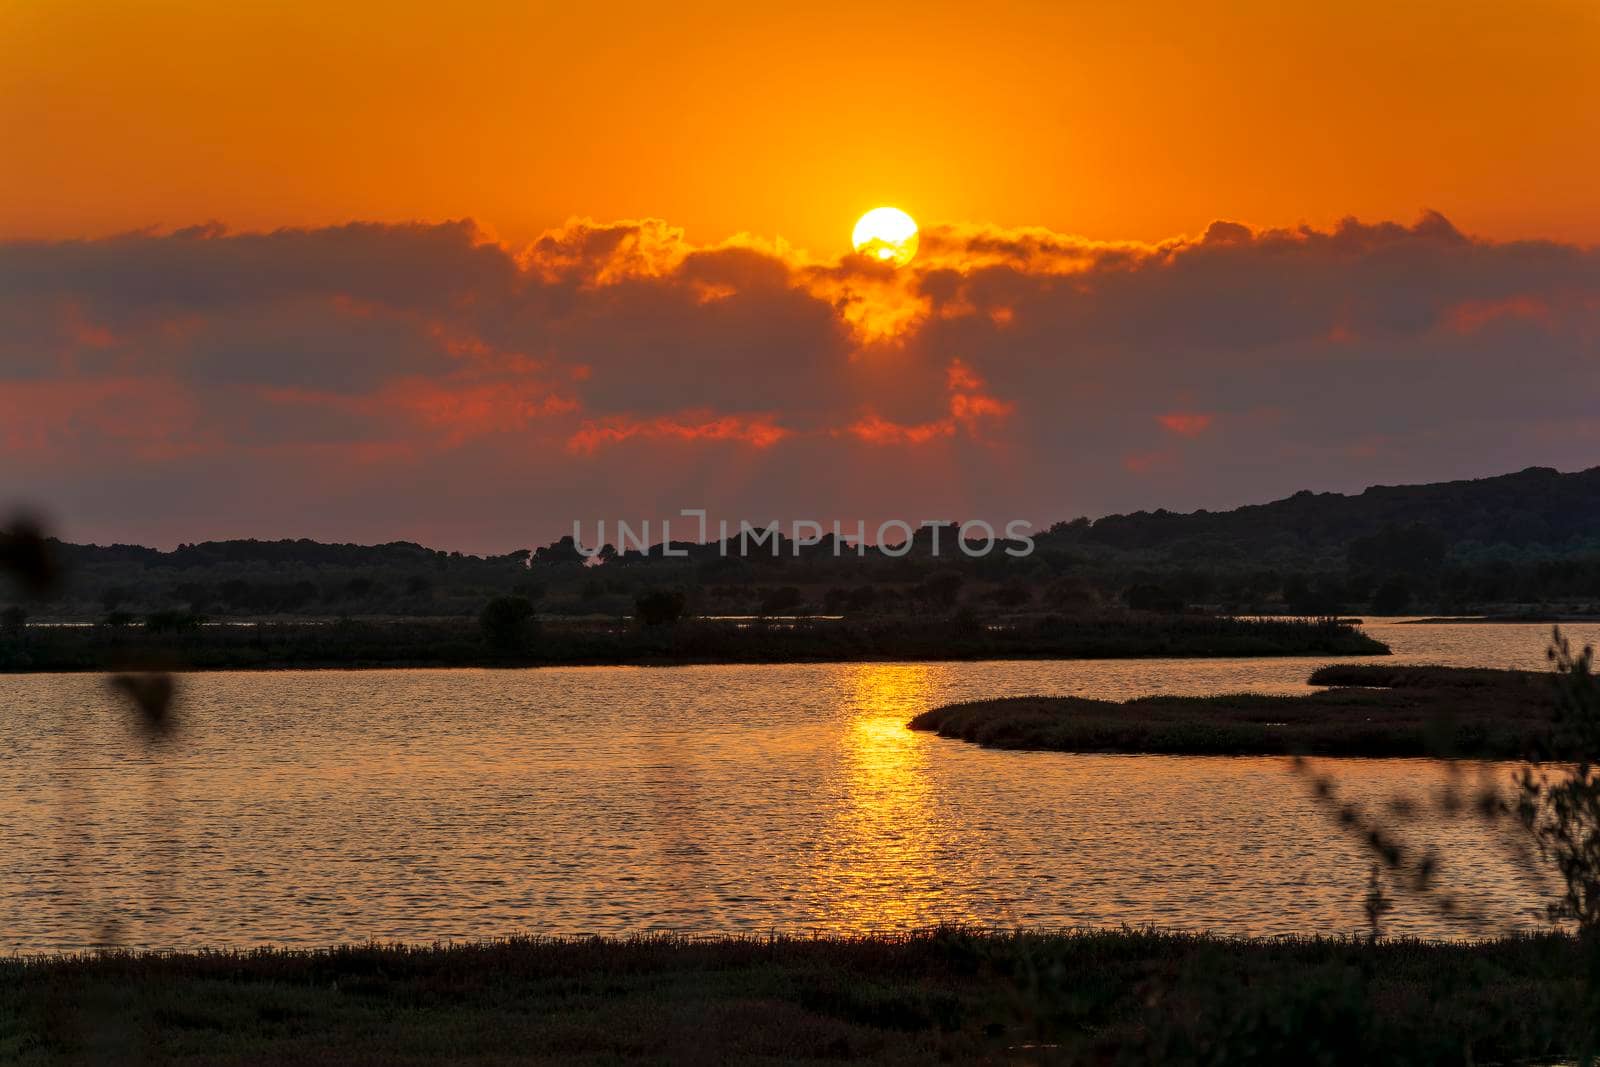 Sunset at the gialova lagoon. The gialova lagoon is one of the most important wetlands in Europe. by ankarb